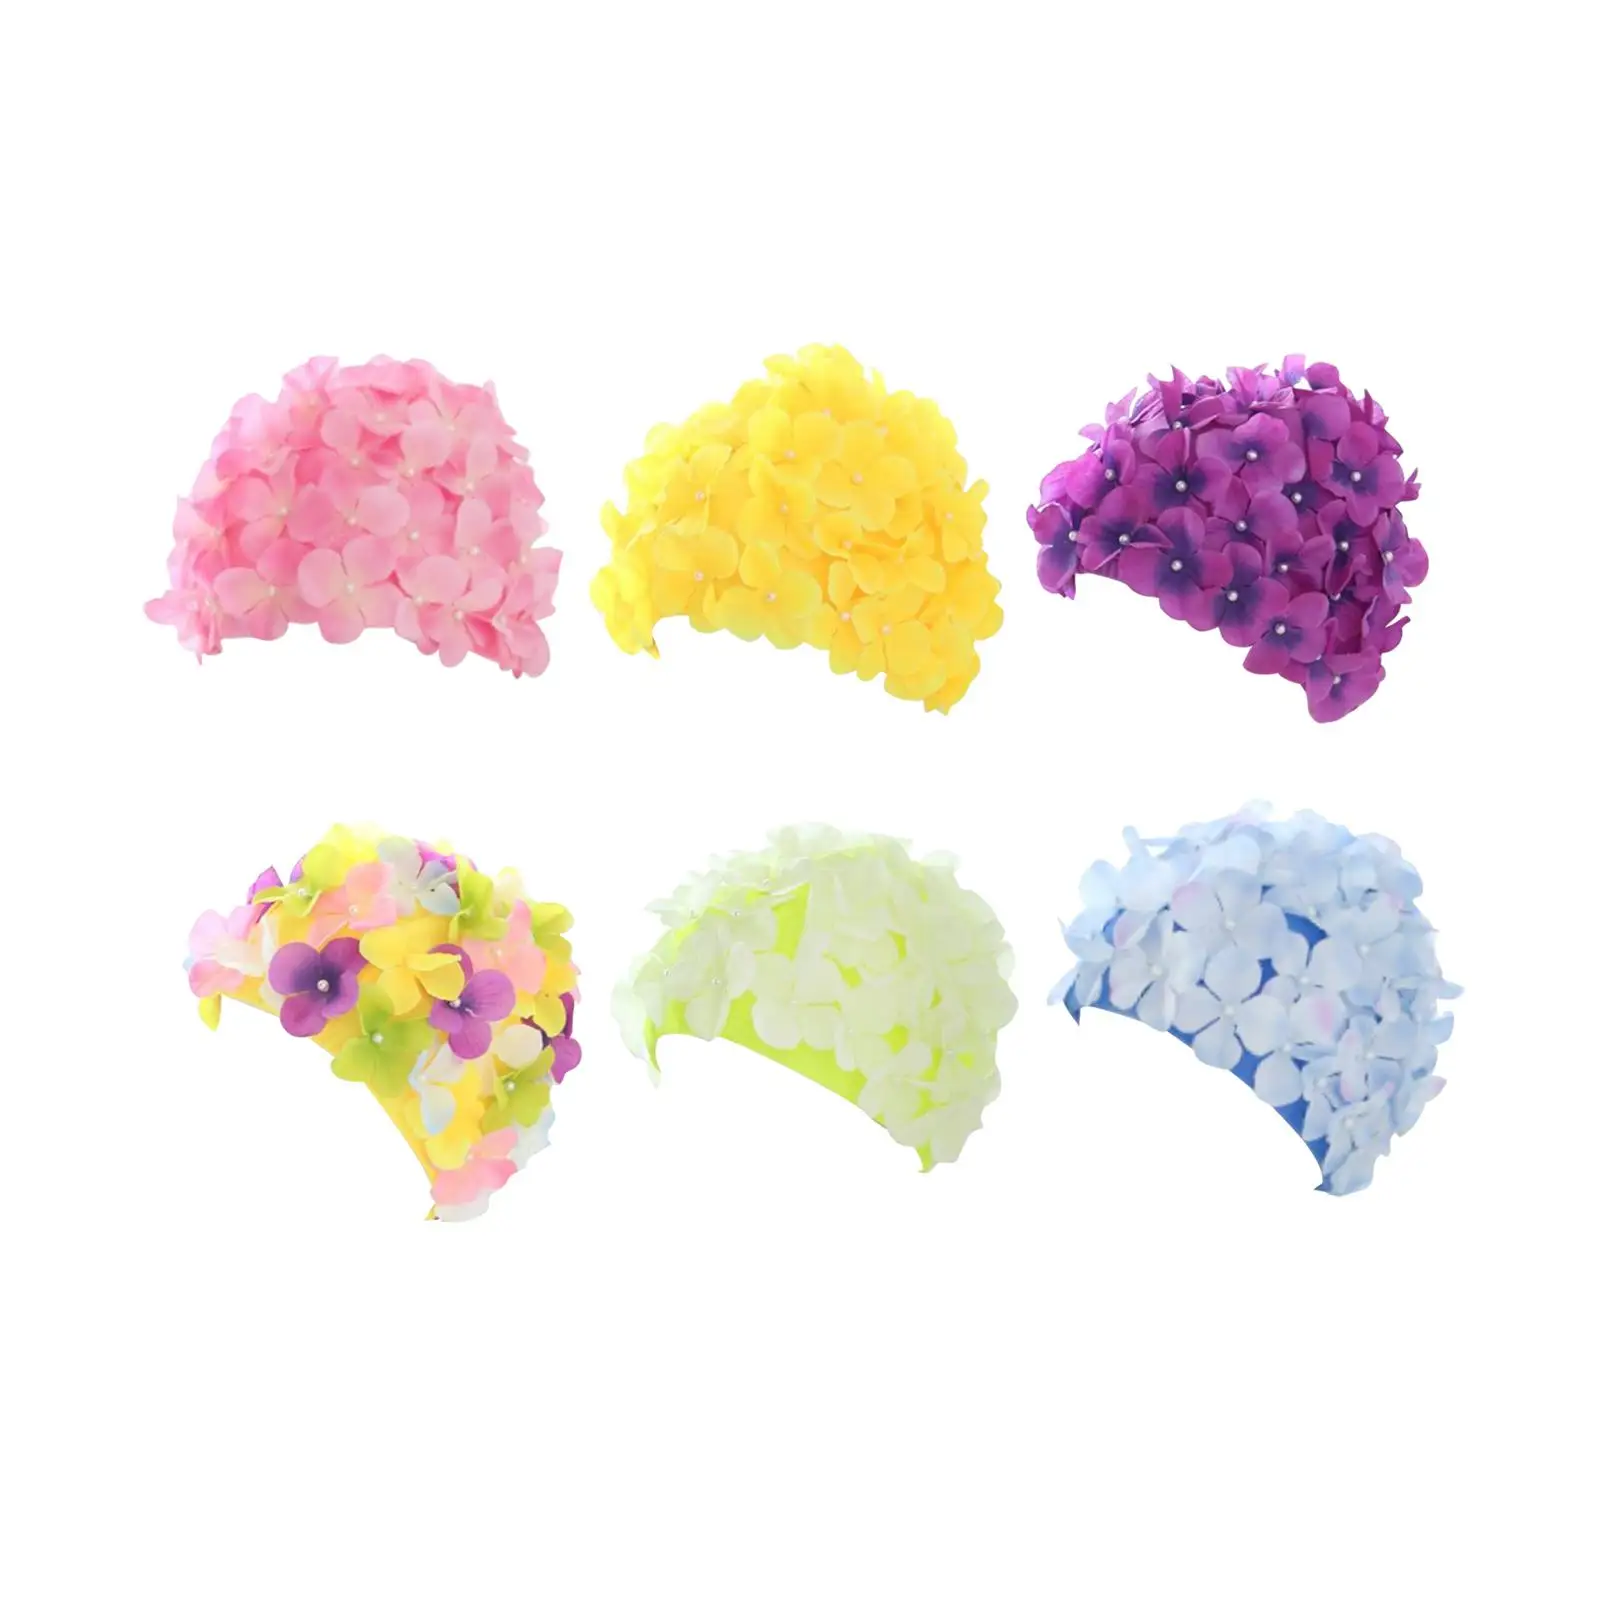 Flower Swim Caps Women Silicone Girls Durable Portable Fashionable Reusable Swimming Caps for Long Short Hair Vacation Swimming